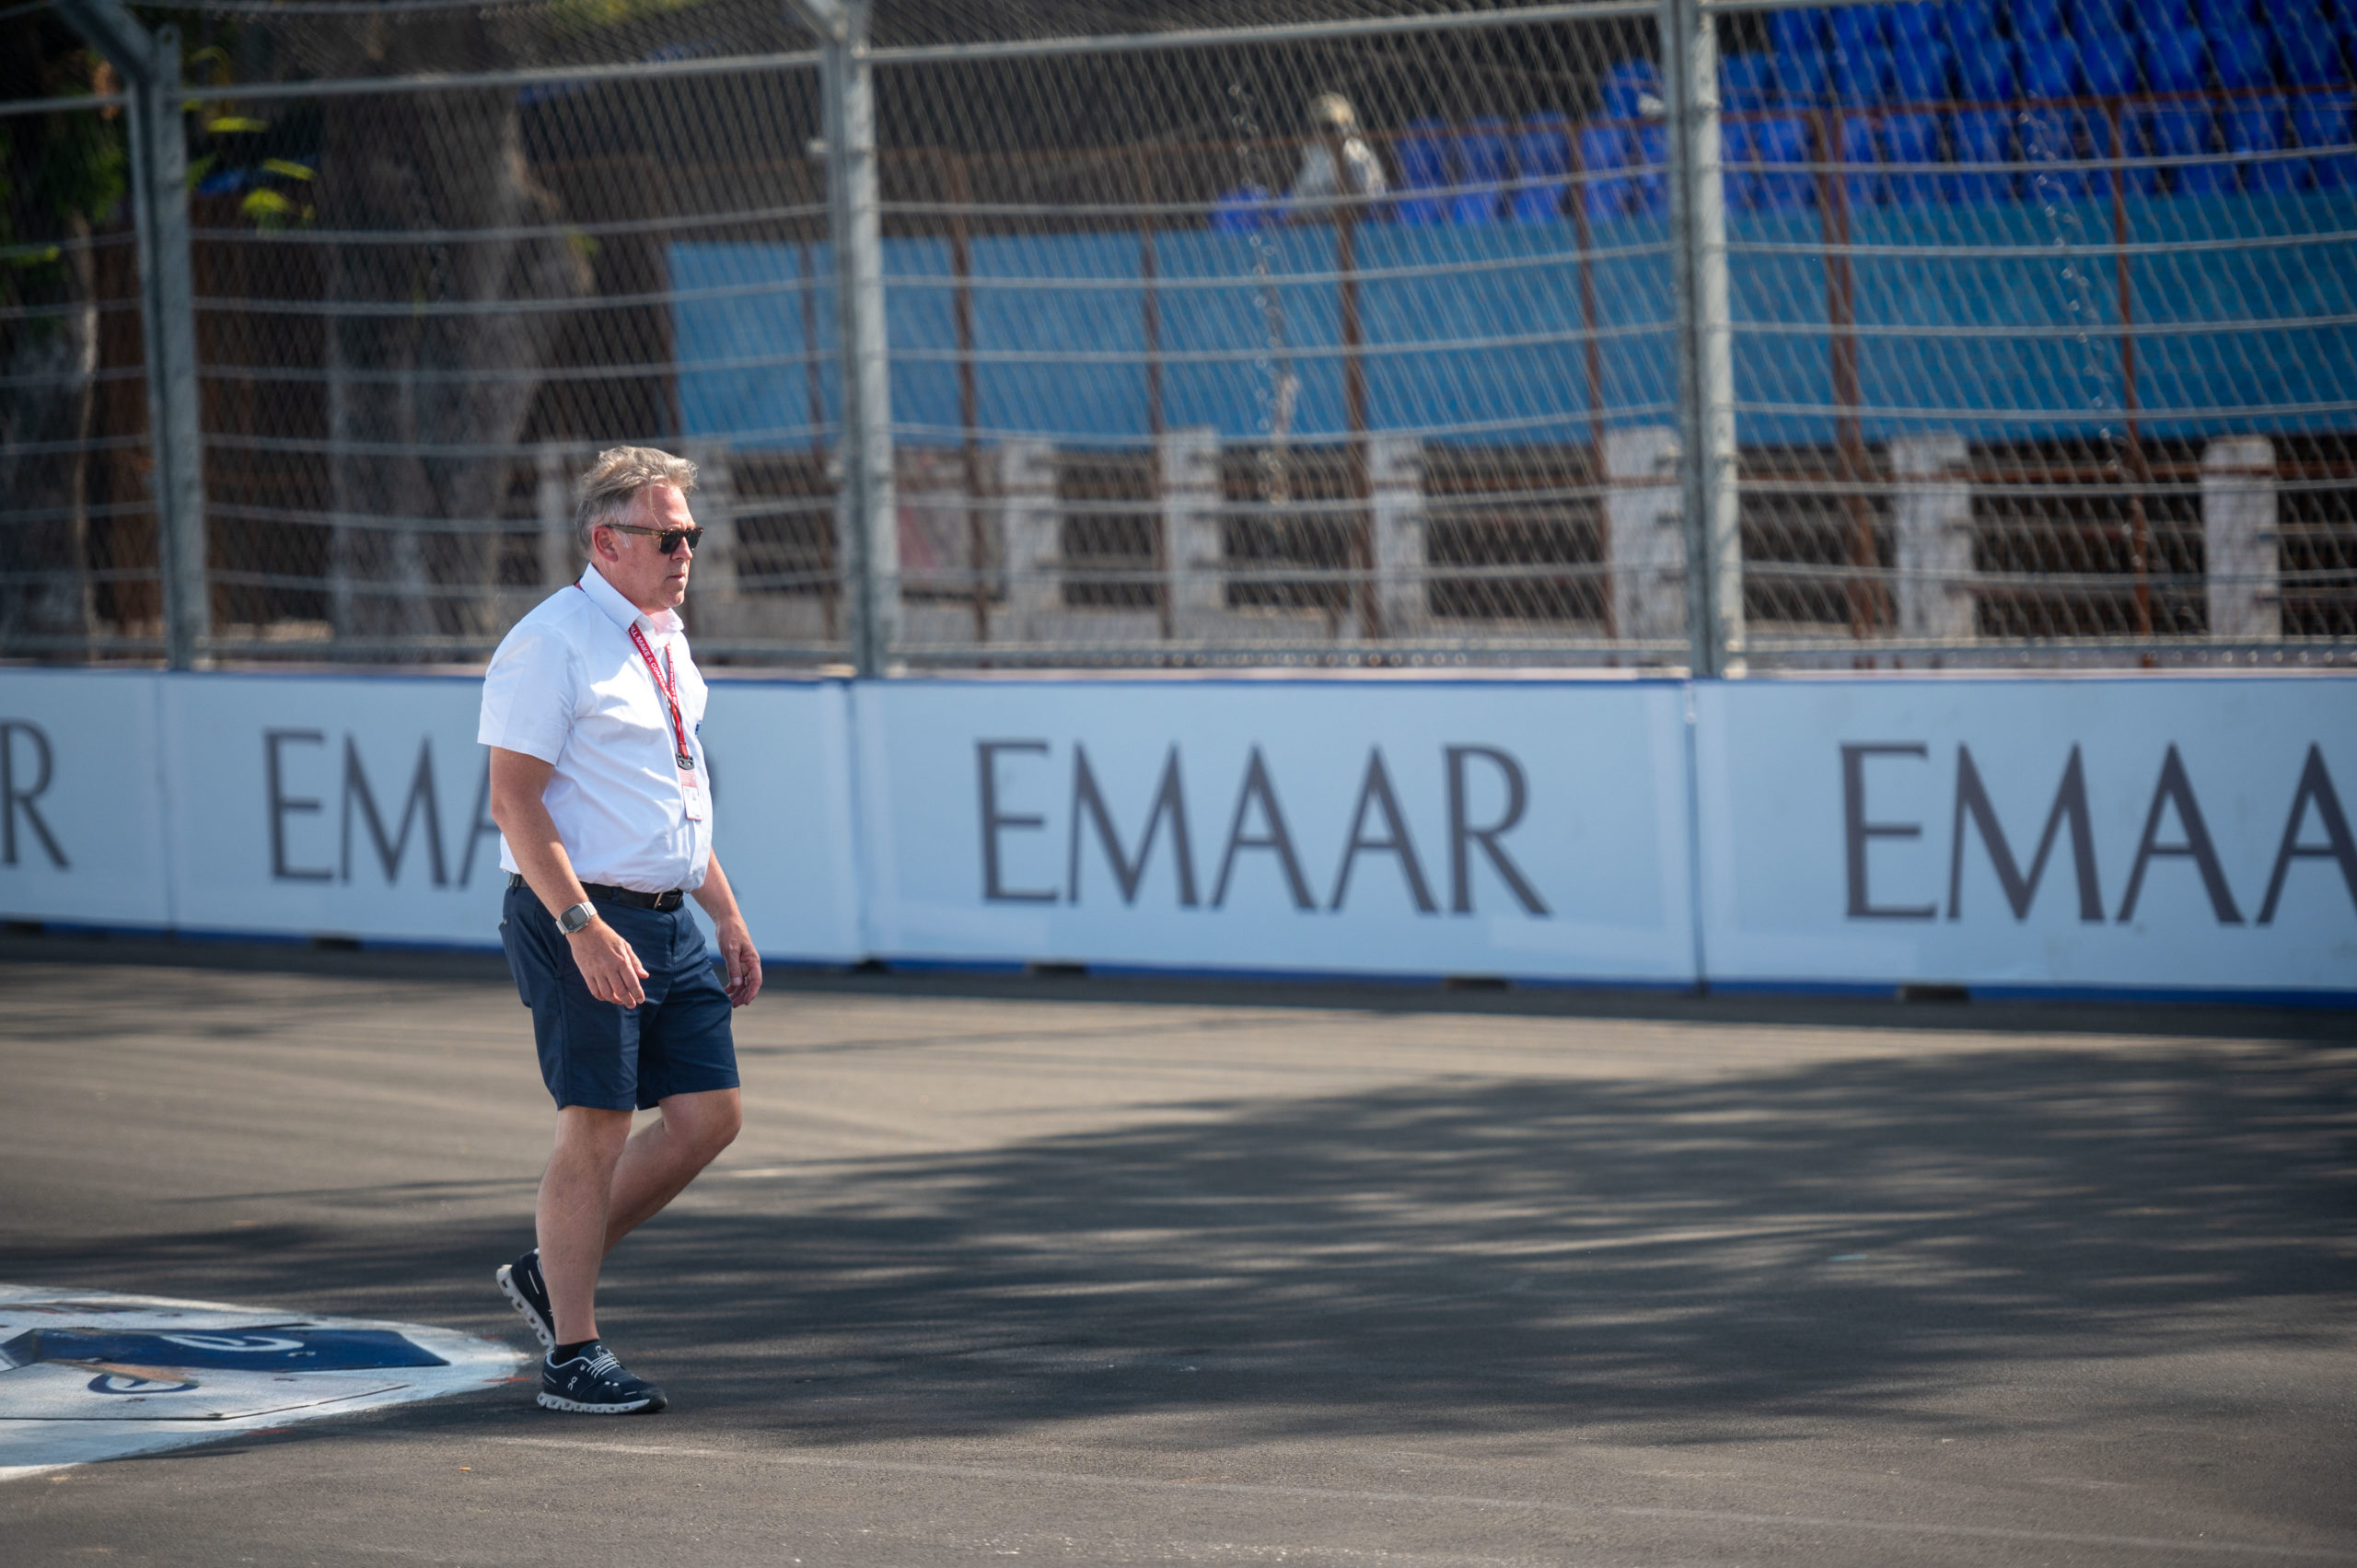 the ‘dating’ process behind every new formula e race